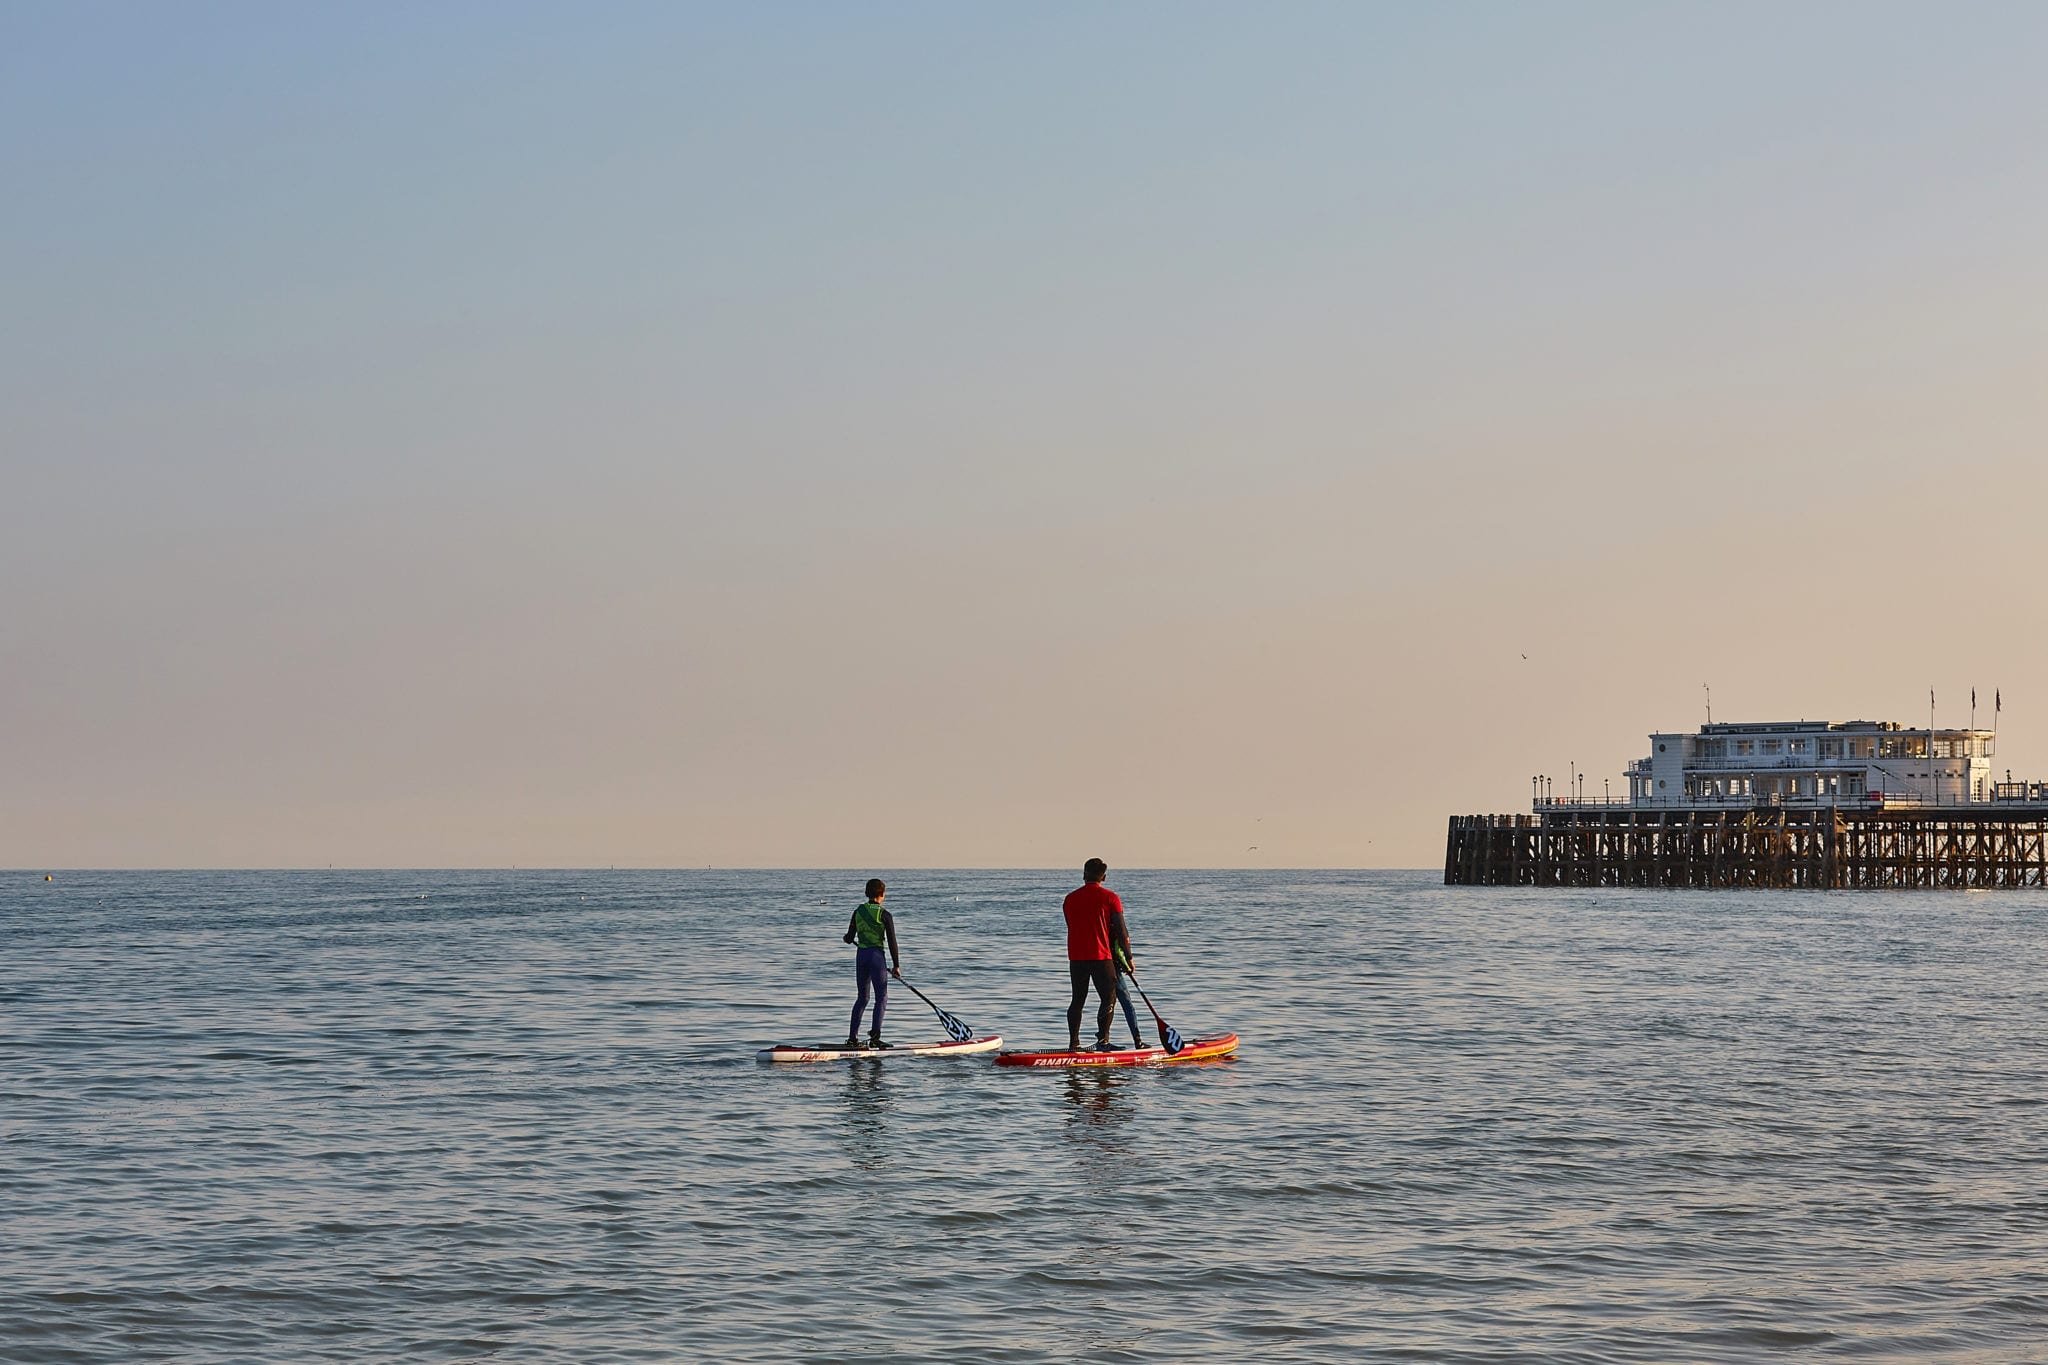 Two people paddleboarding near Worthing Pier